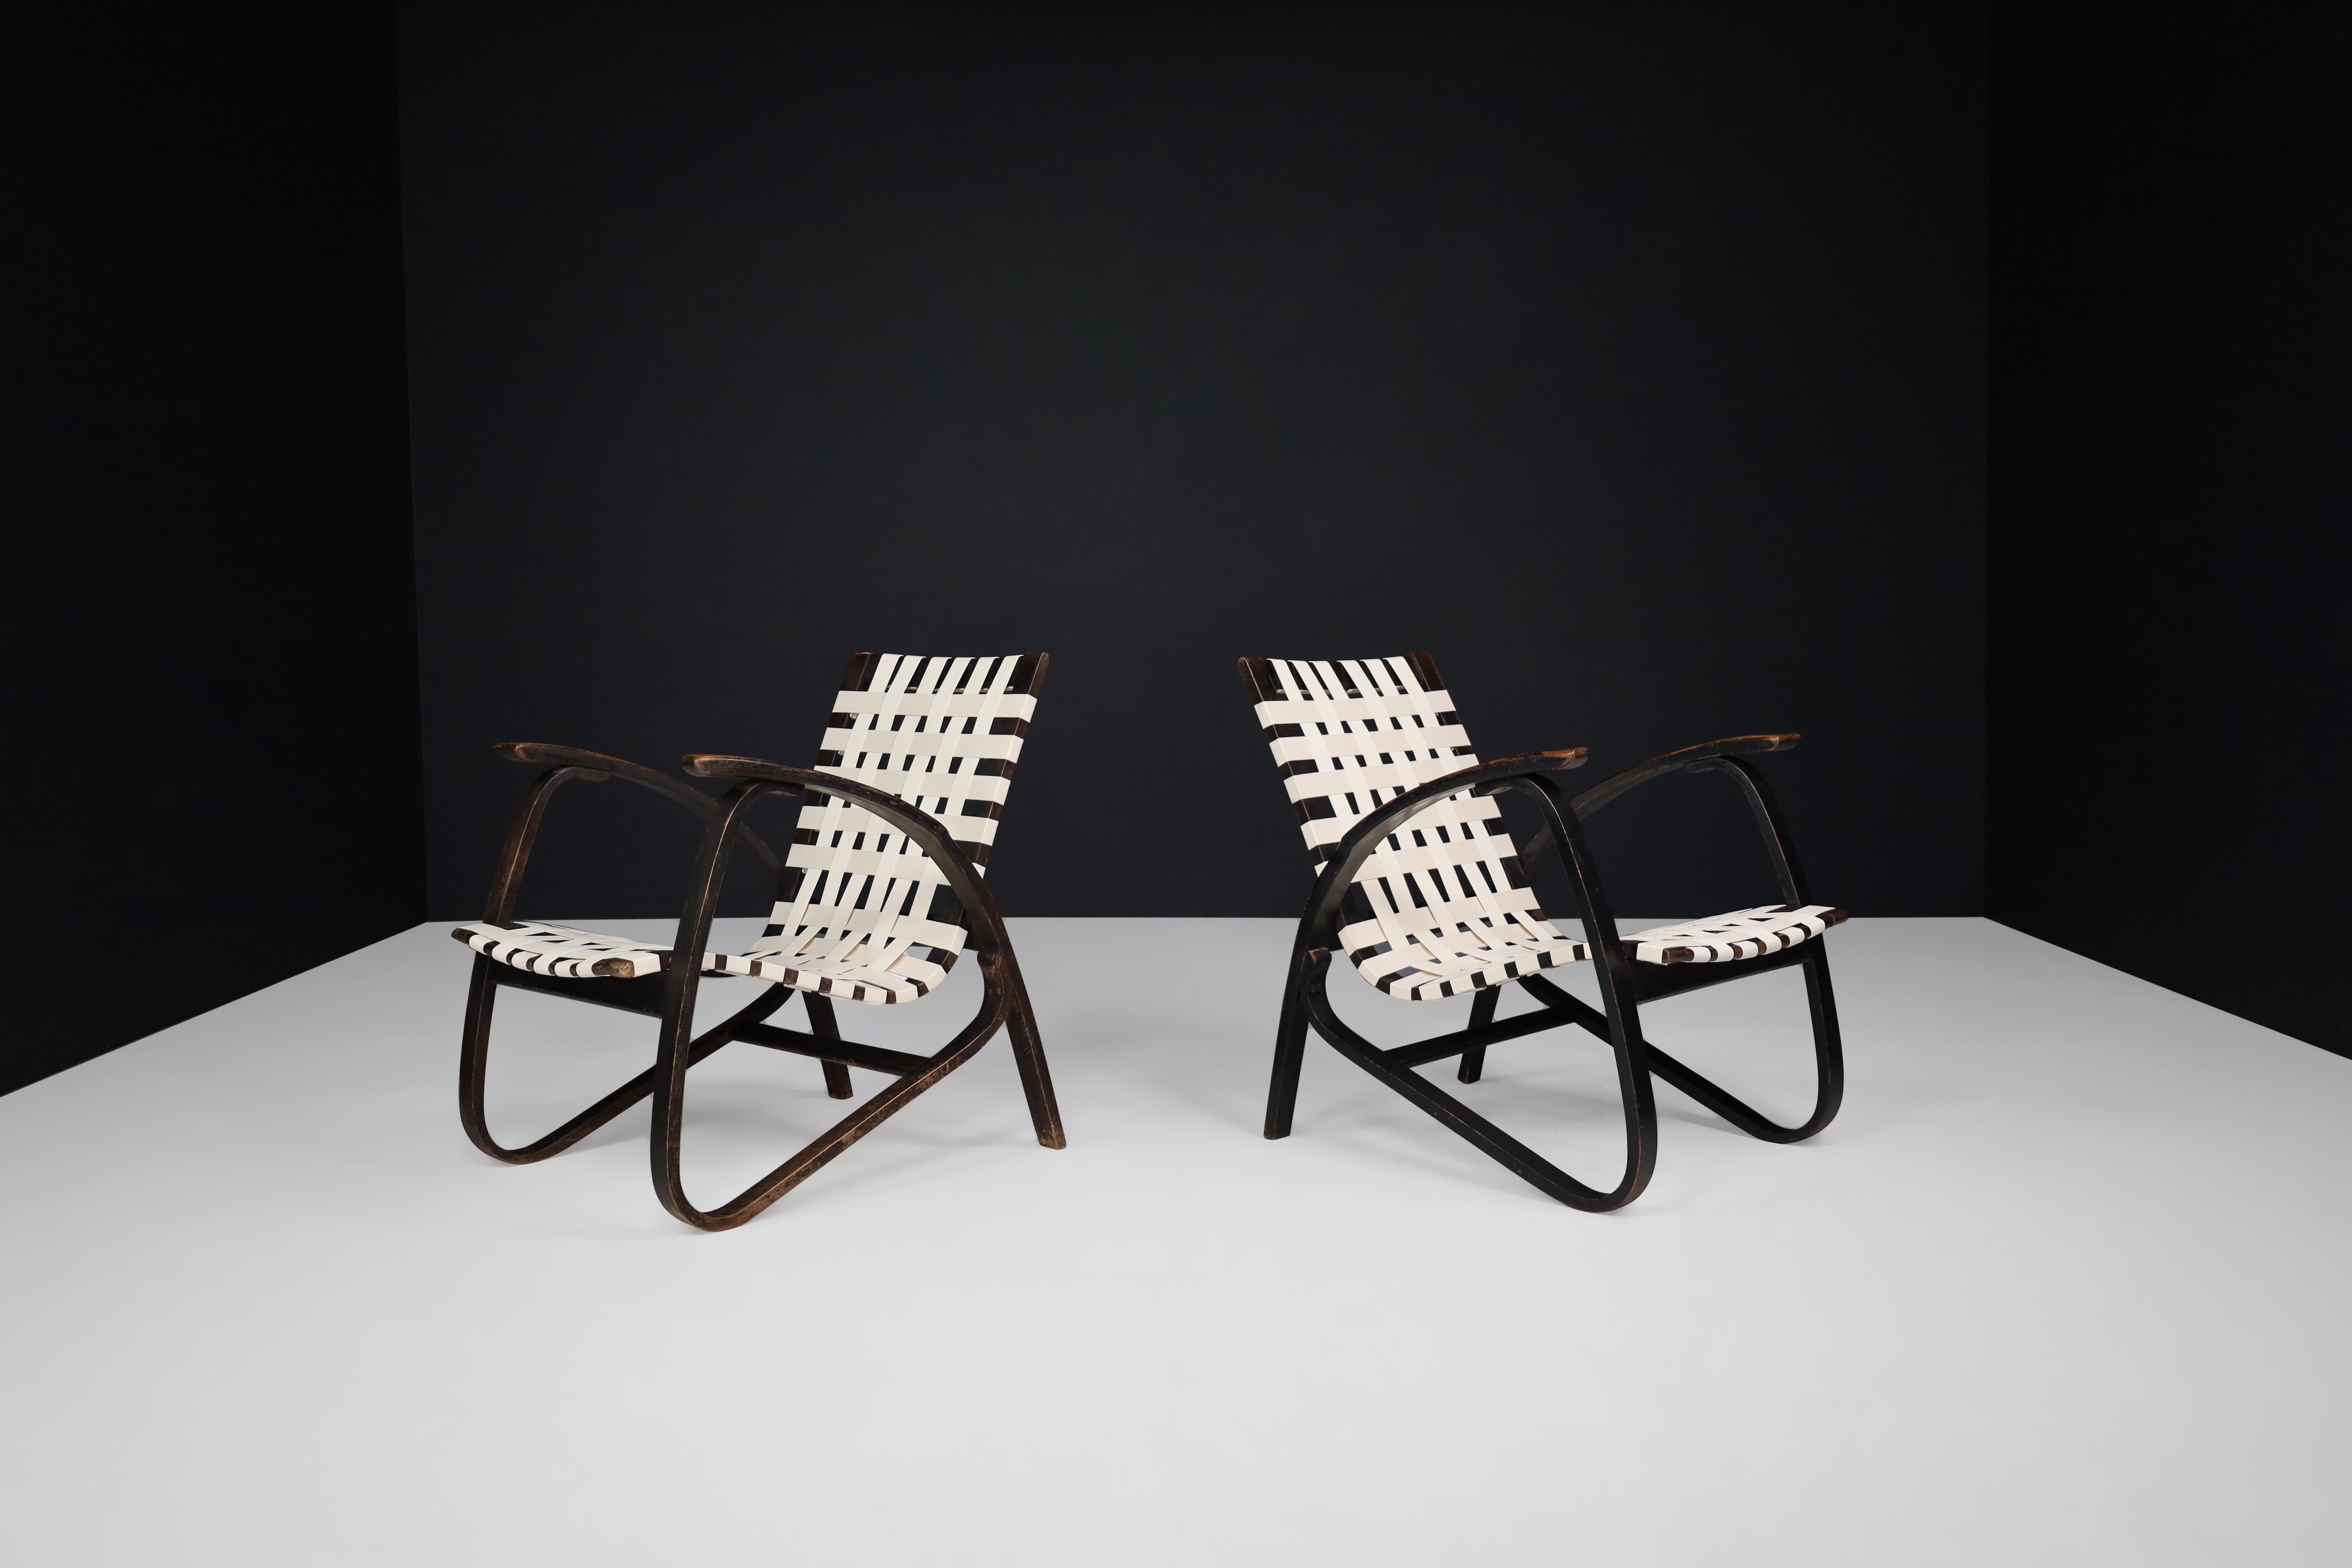 Jan Vanek pair of lounge chairs in bentwood and canvas, Praque 1940s.

Pair of elegant armchairs designed by Czech architect Jan Vanek in the 1940s, who was a contemporary of Jindrich Halabala. These chairs are re-upholstered with a new woven